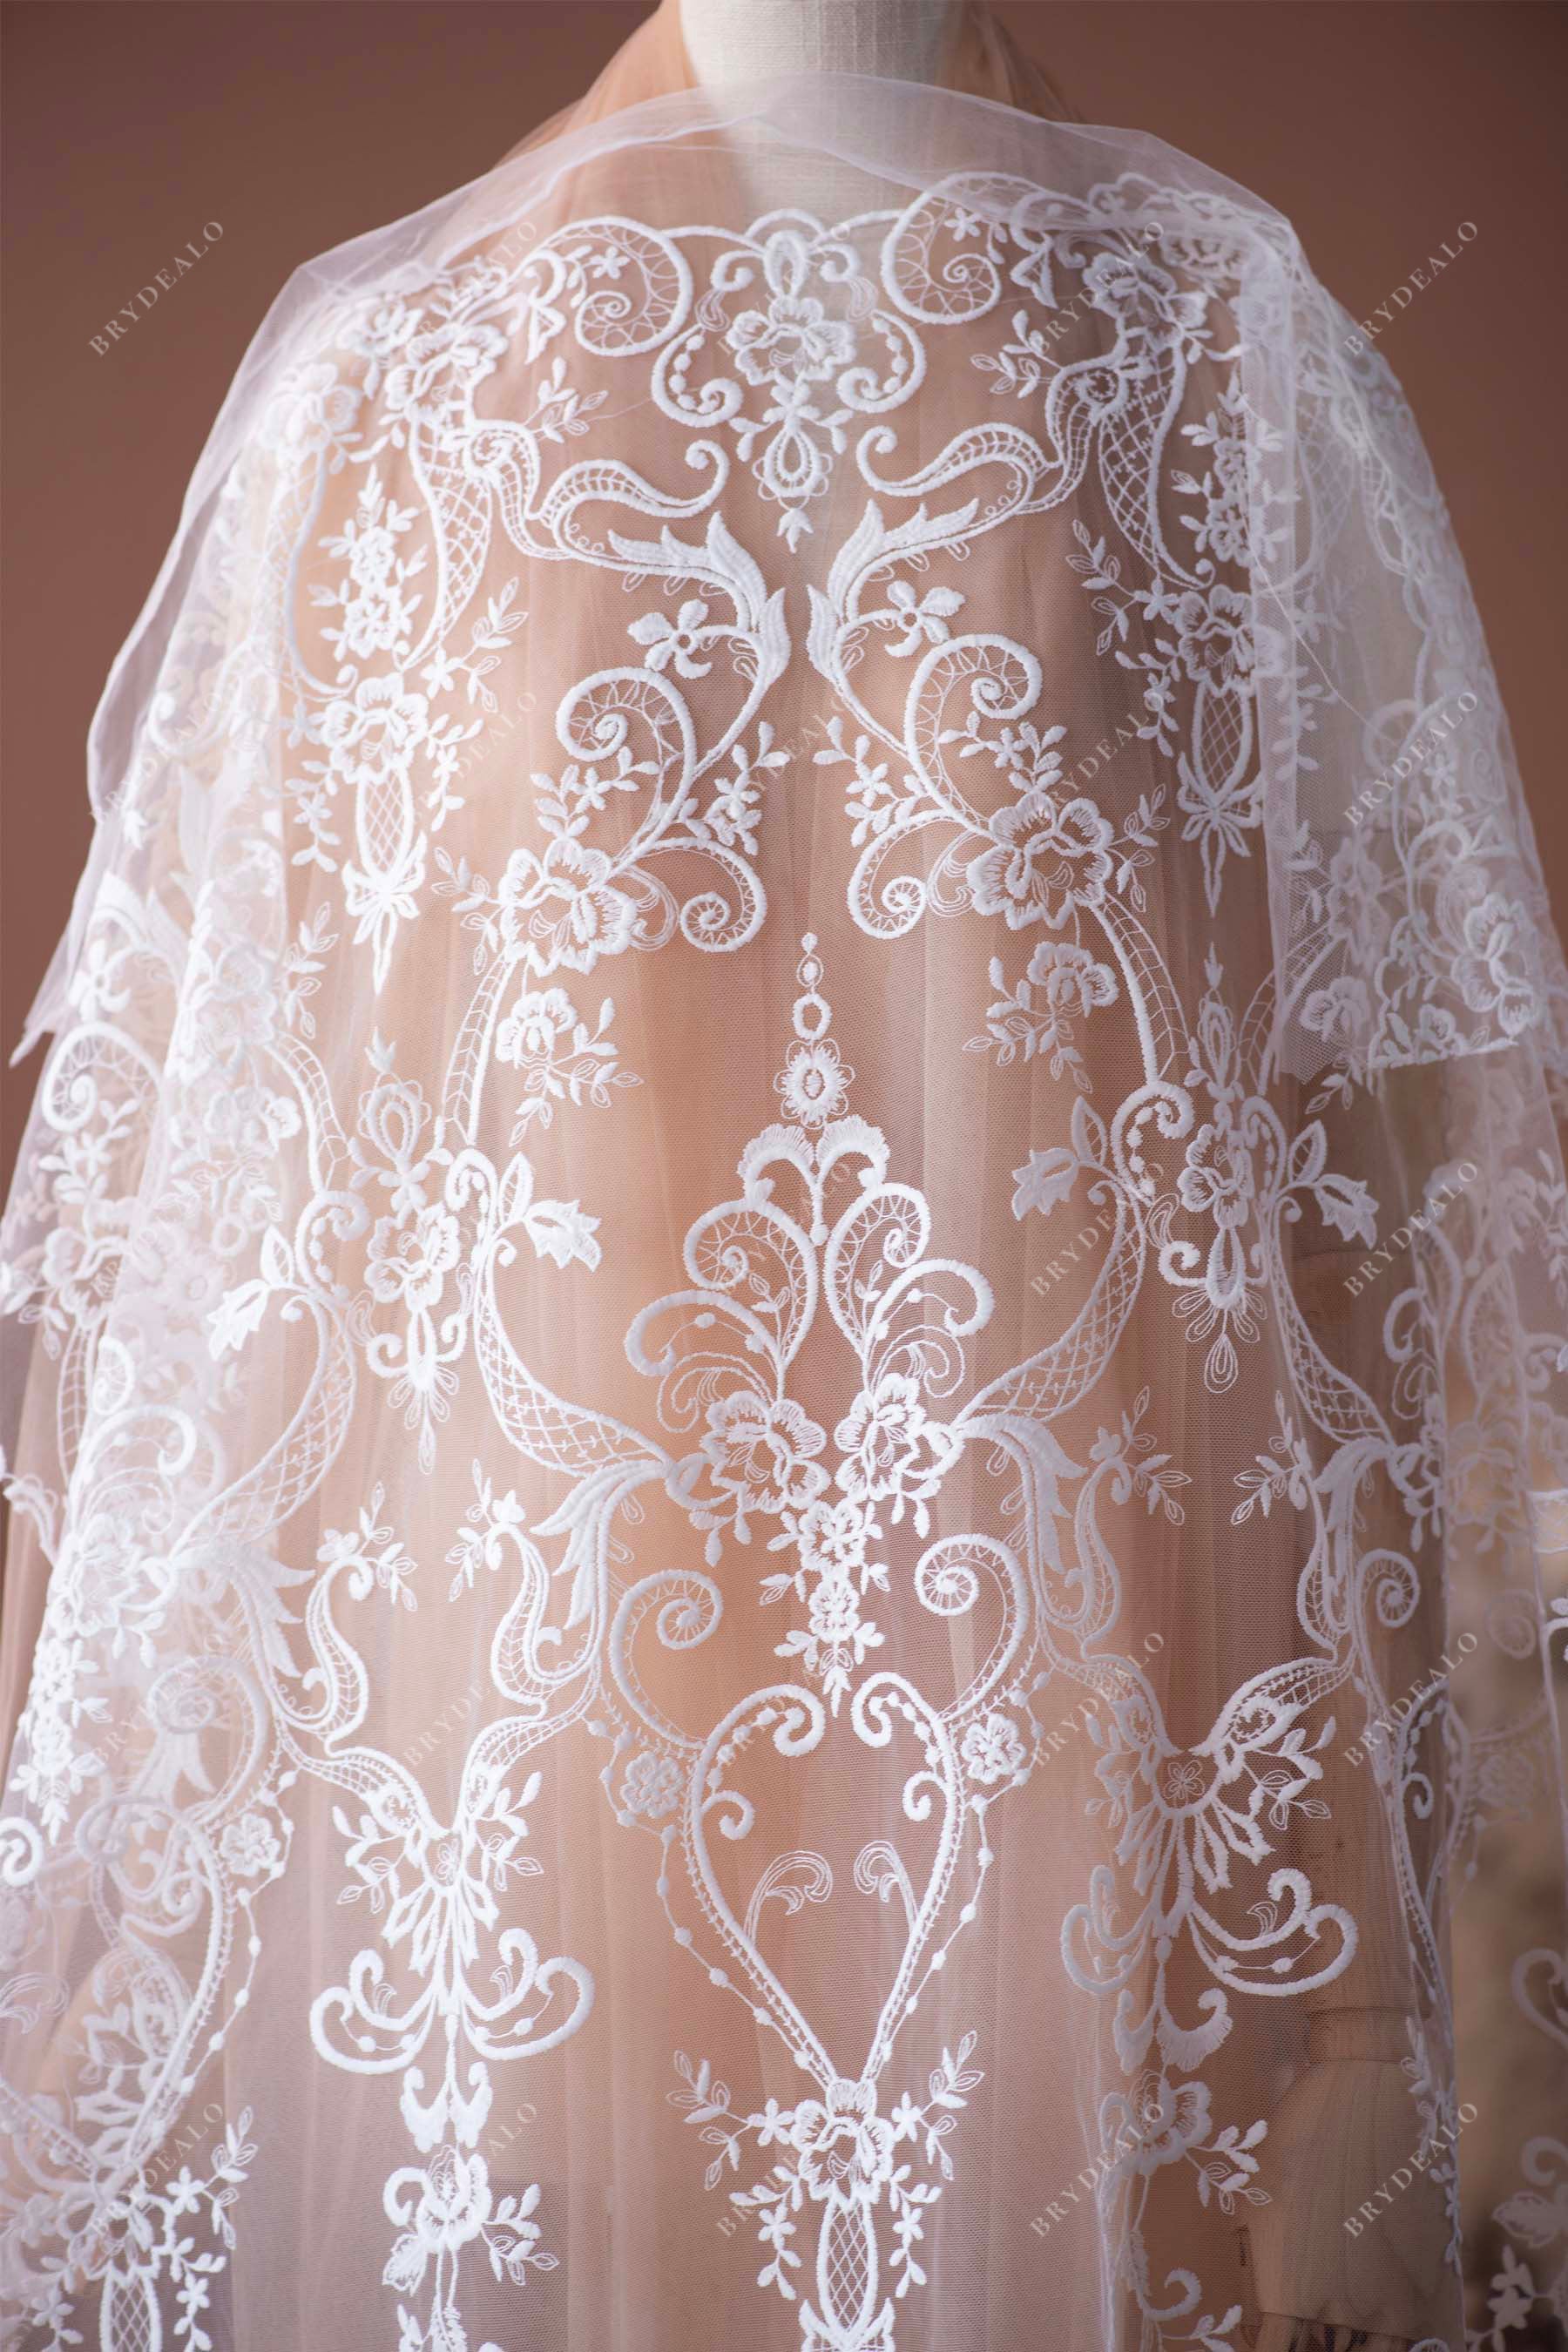 wholesale abstract patterned bridal lace fabric